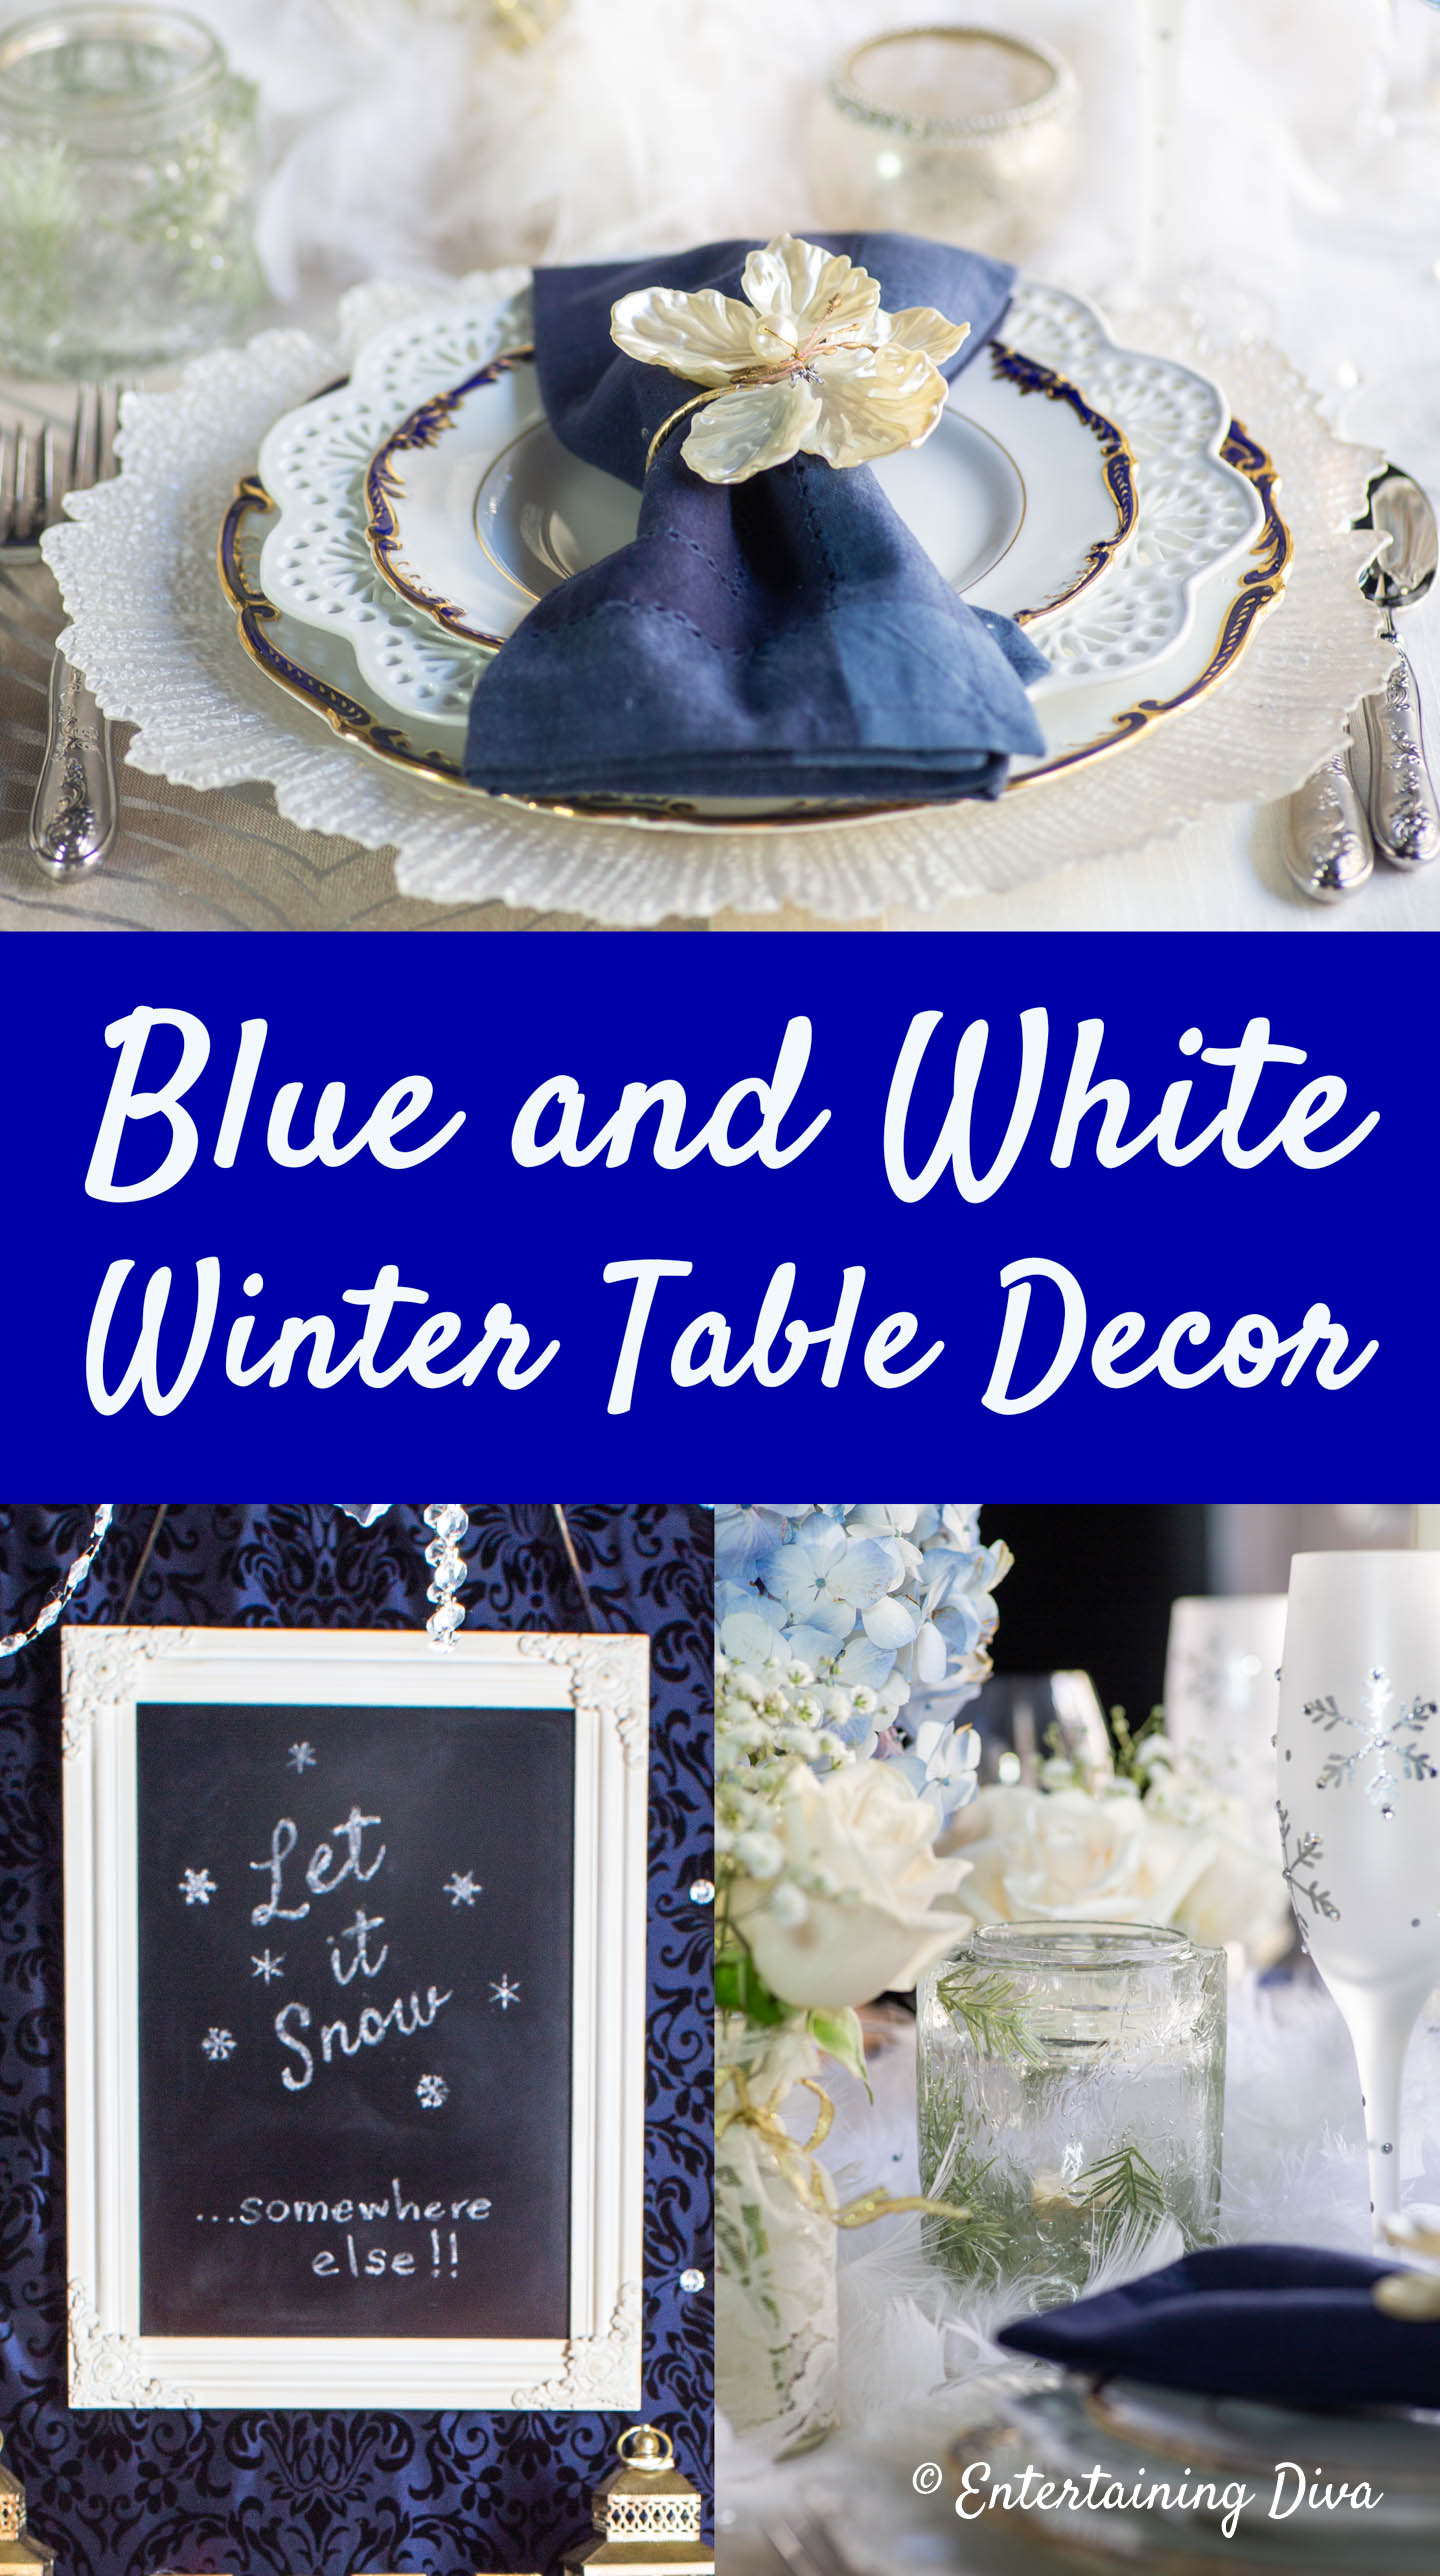 Blue and white winter table decor